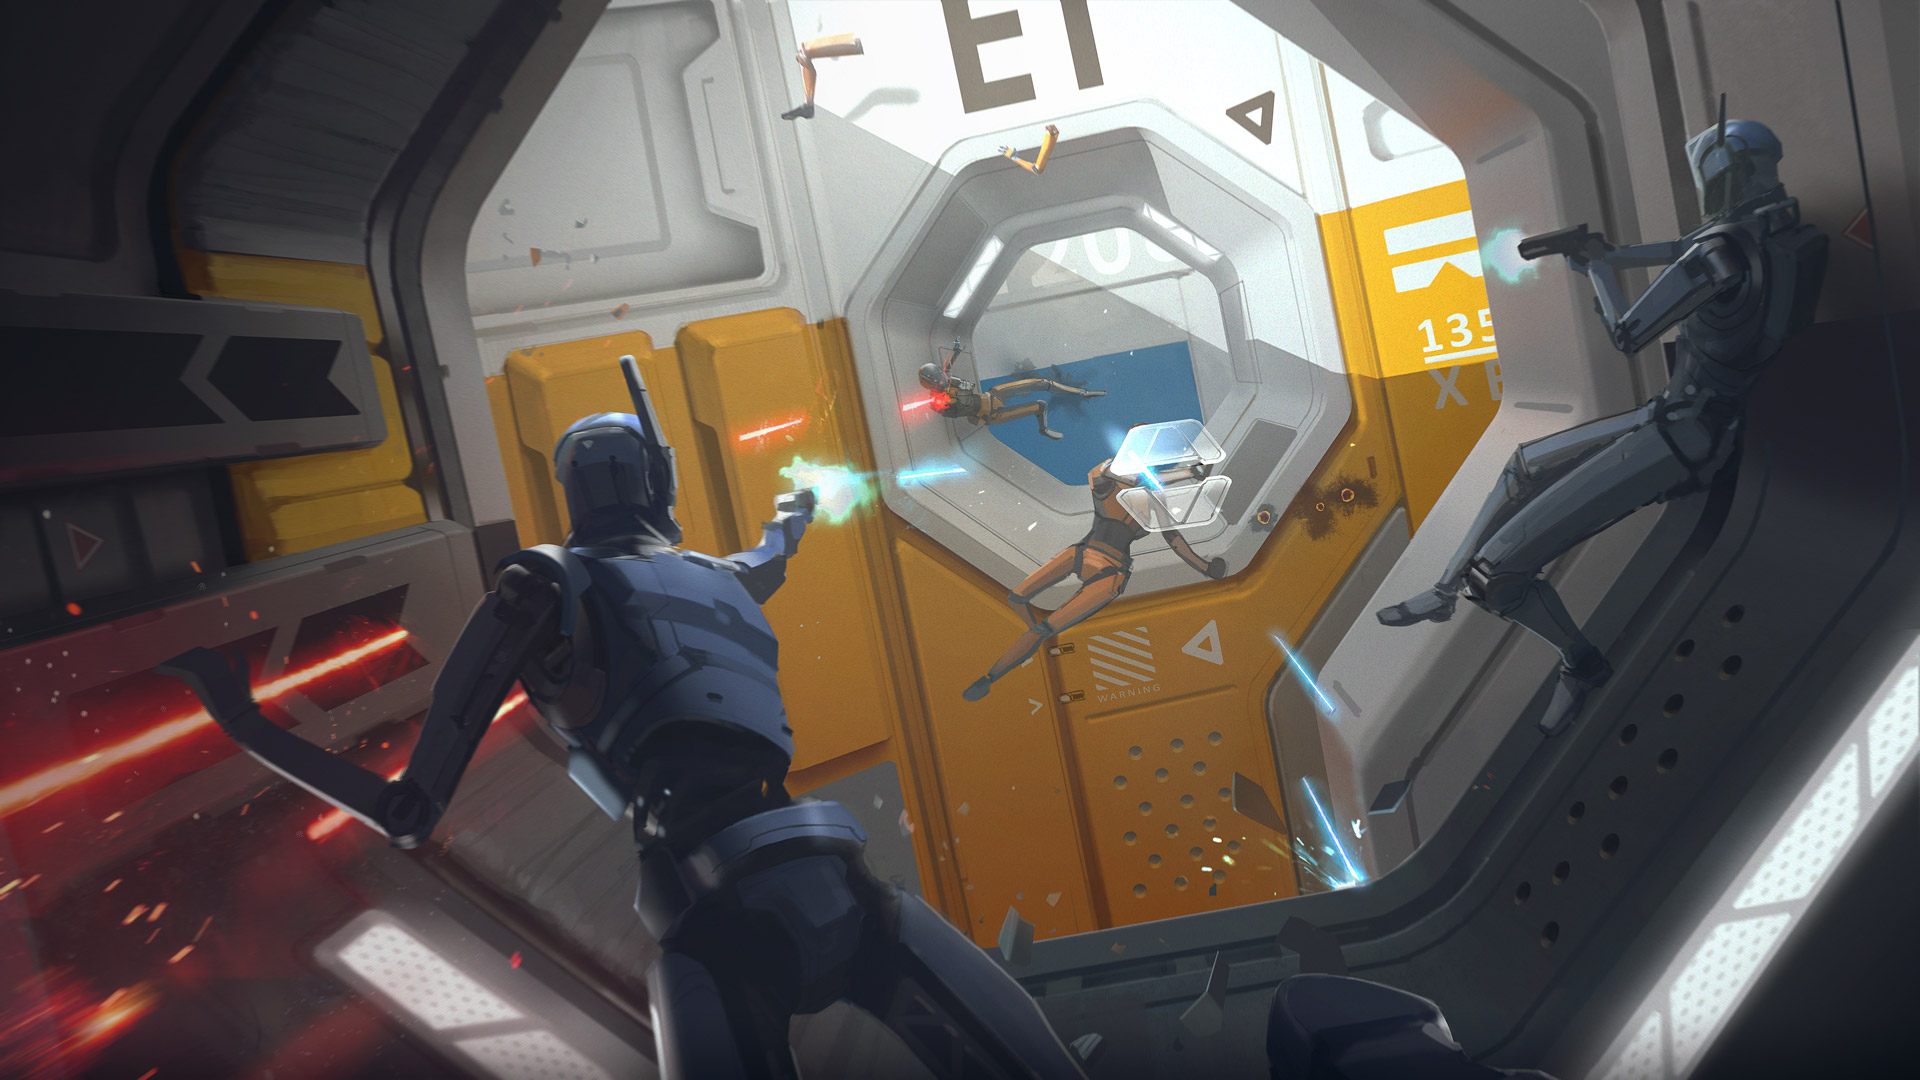 Meta’s Ready at Dawn Working on ‘new projects’, No Plans for Lone Echo or Echo Combat on Quest